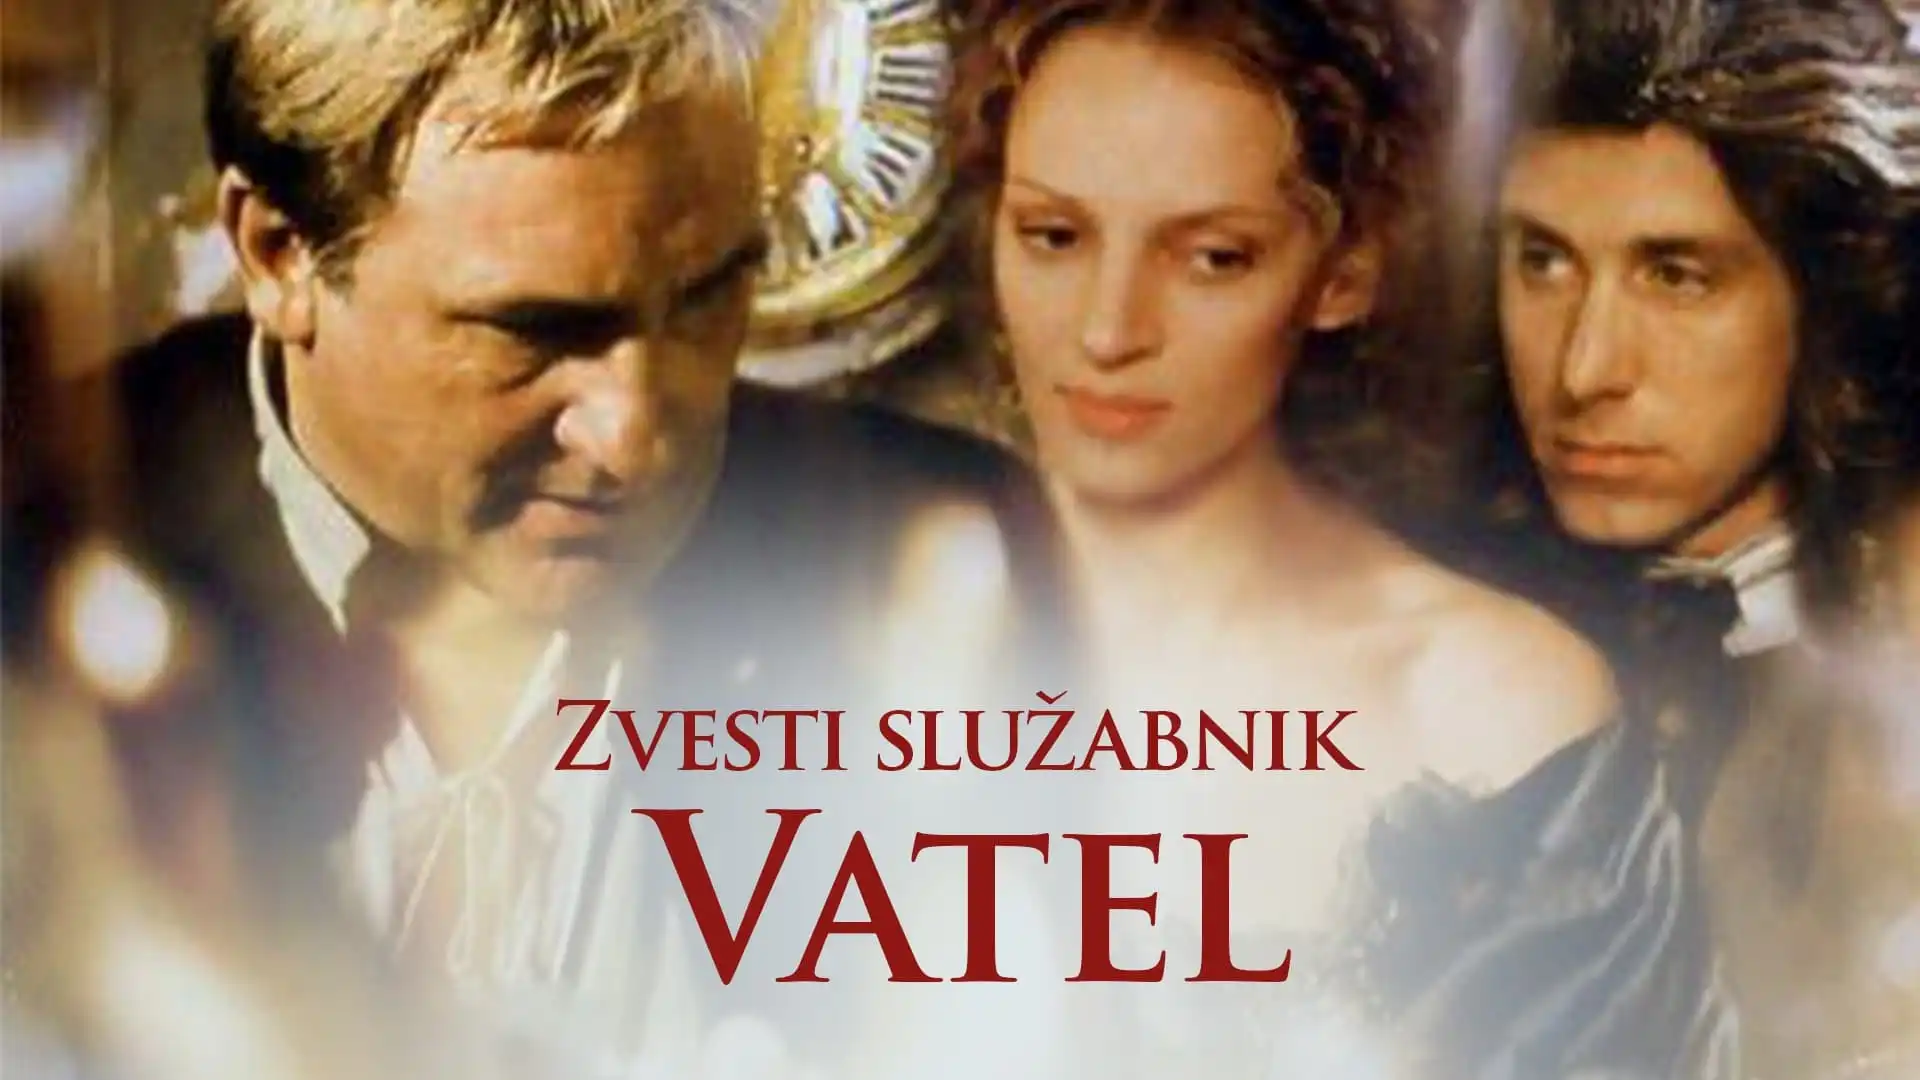 Watch and Download Vatel 1